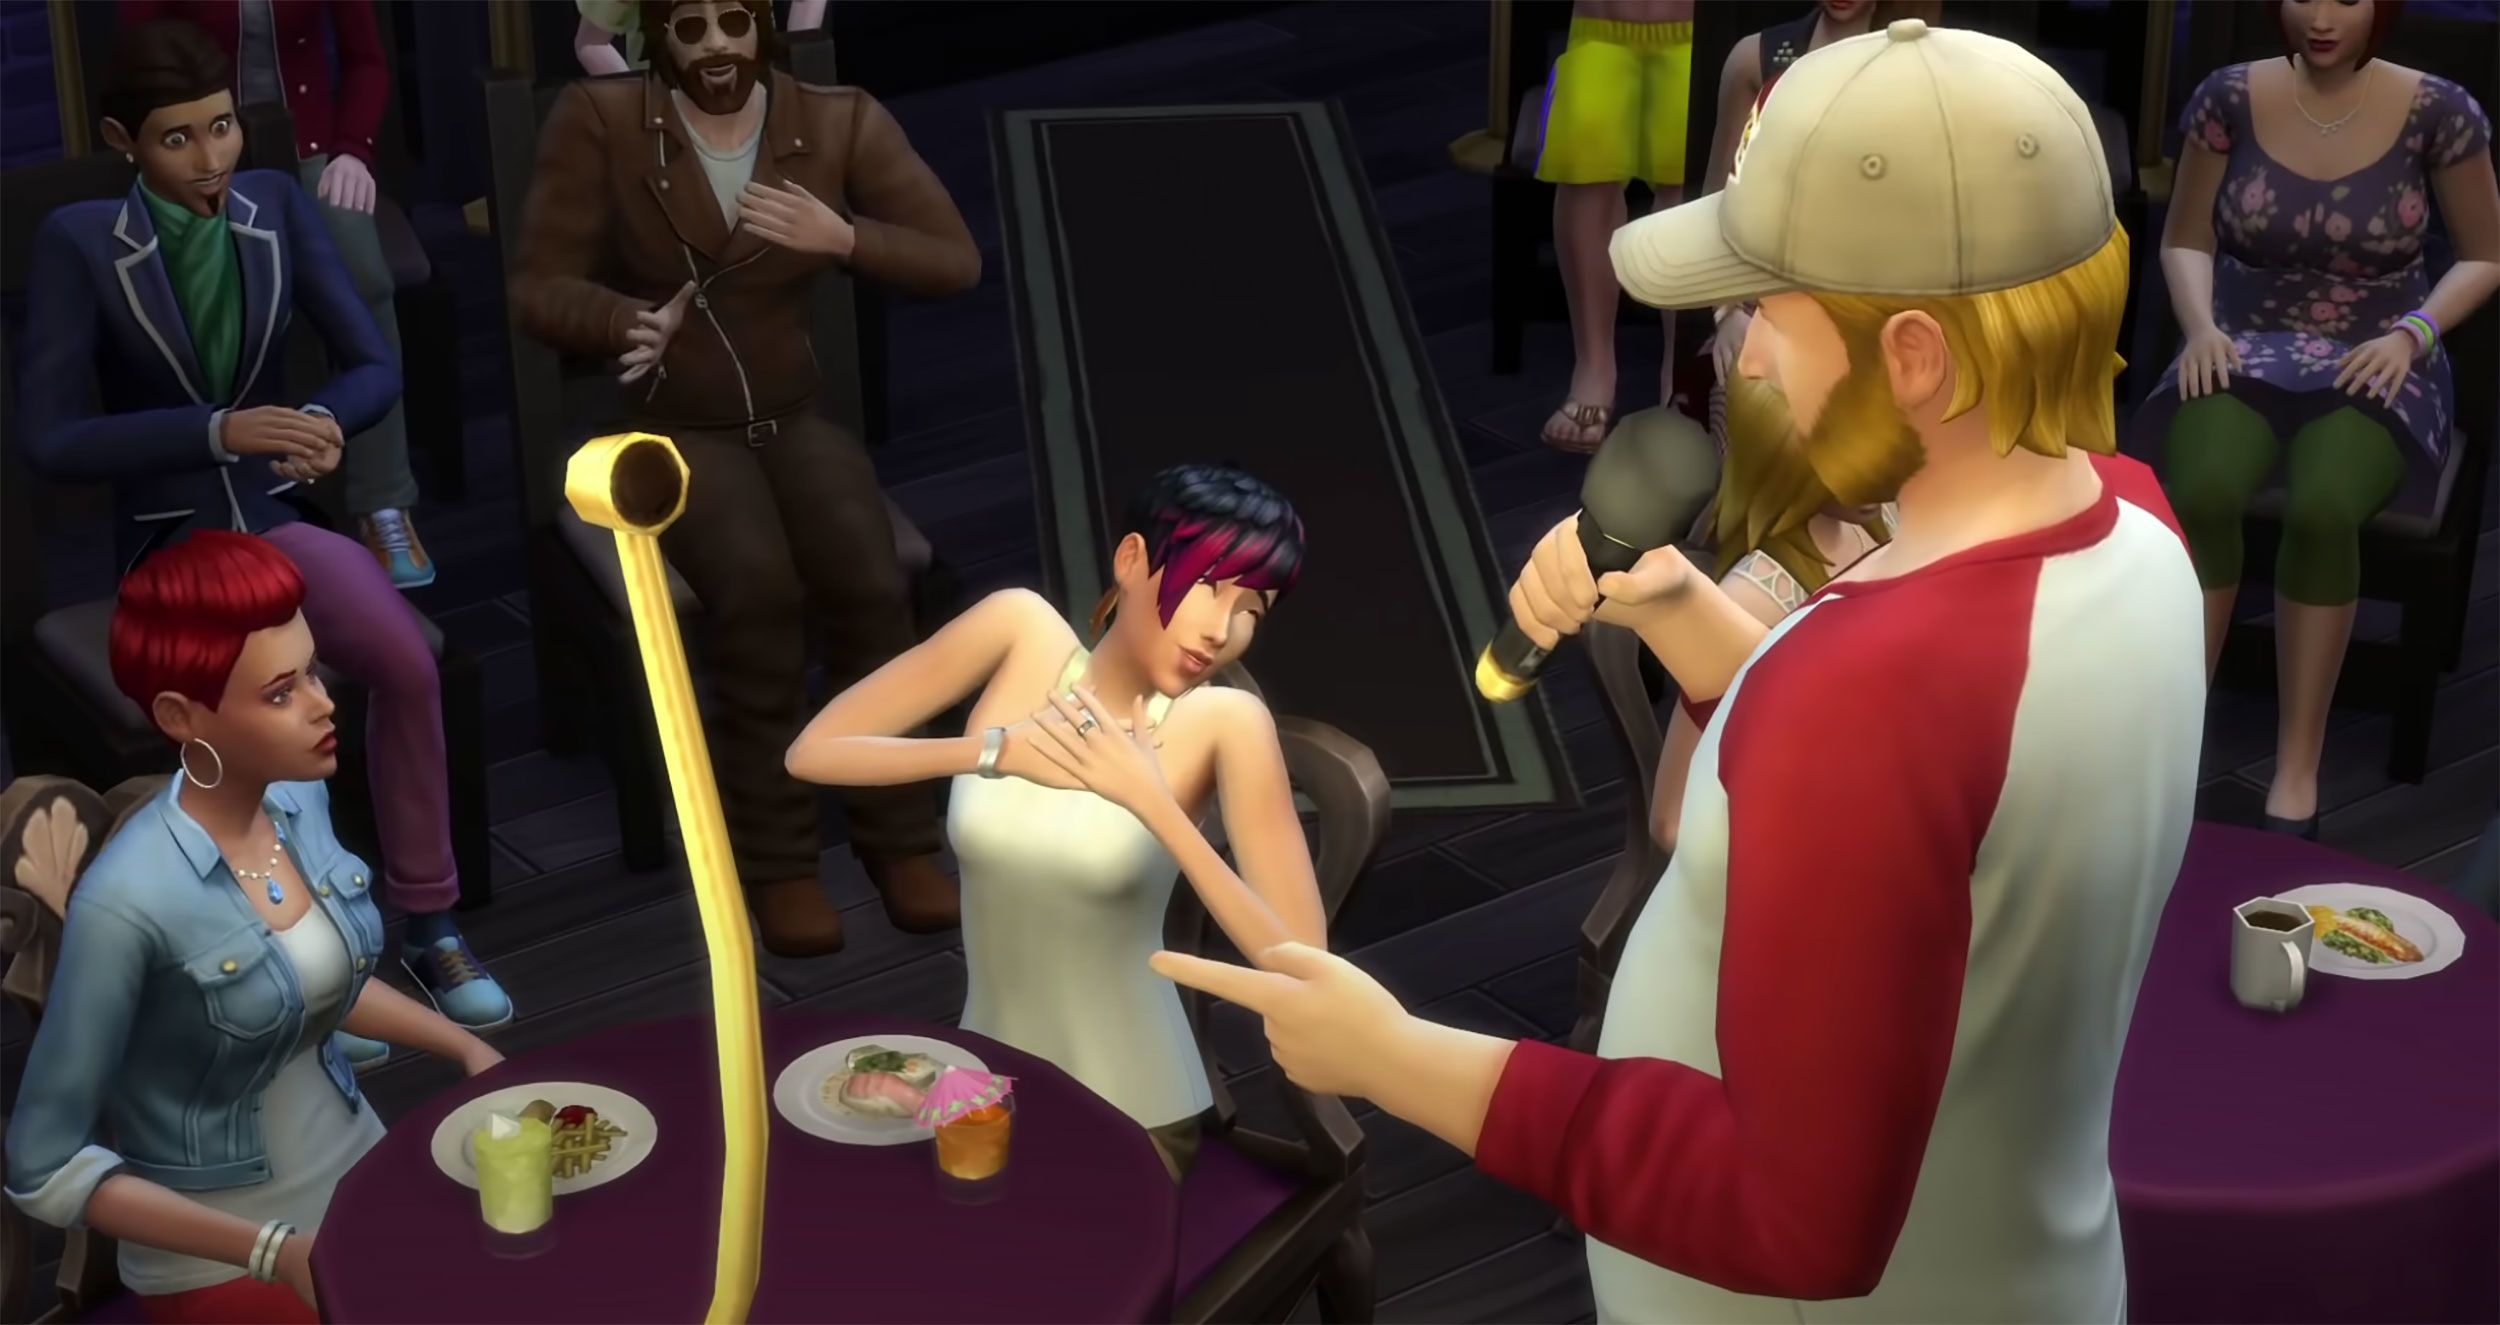 For many neurodiverse people, 'The Sims' has been a lifelong